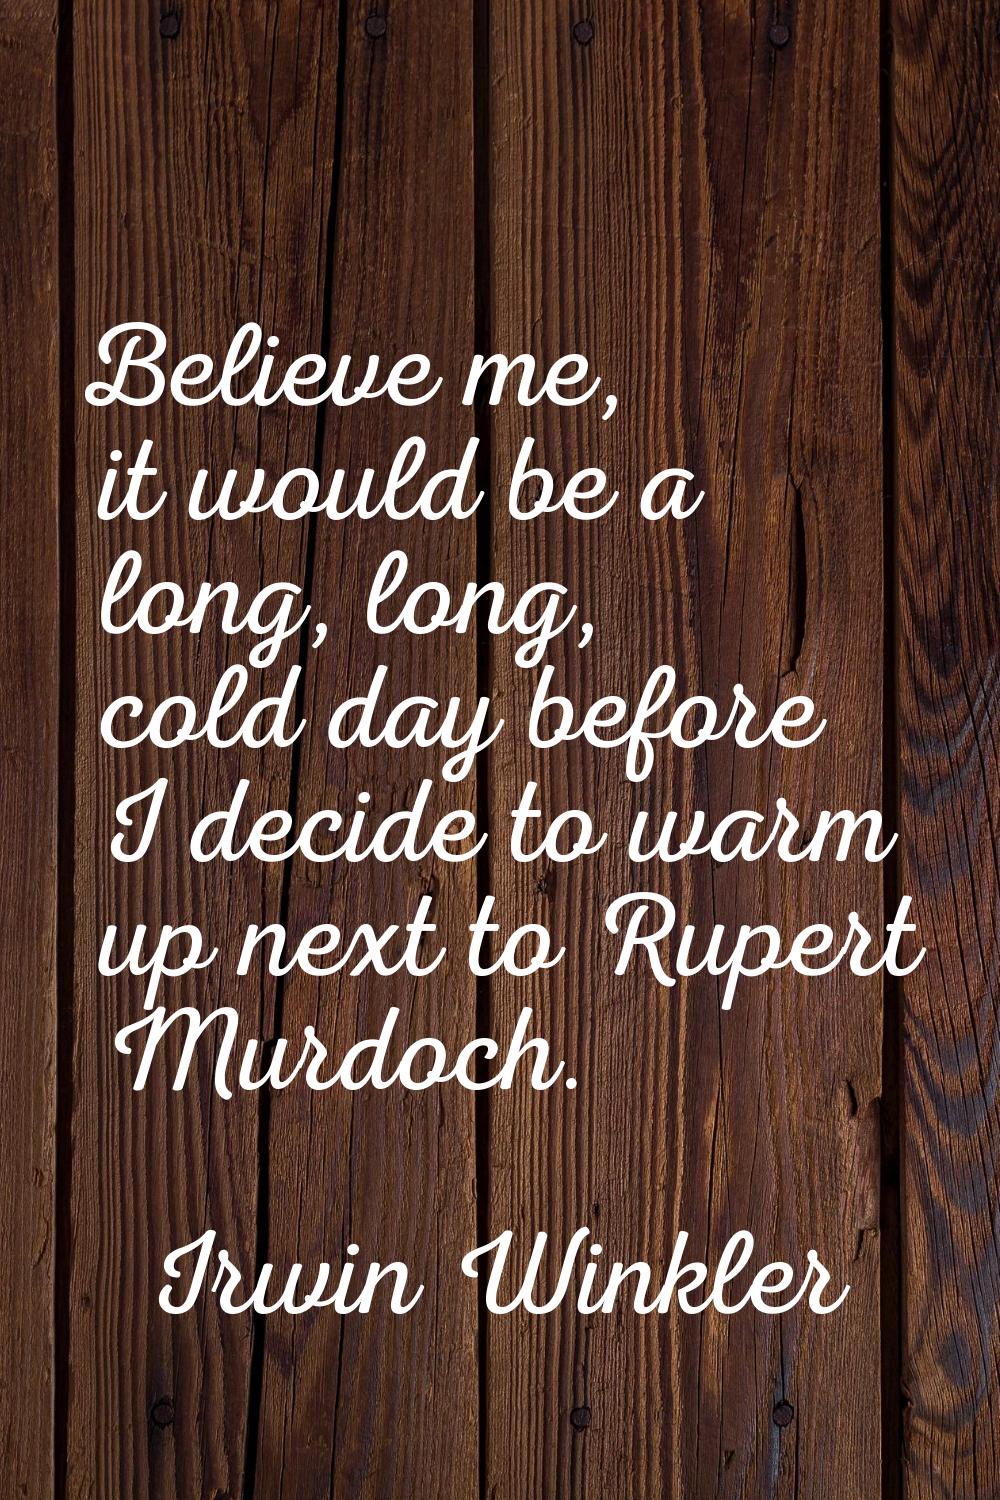 Believe me, it would be a long, long, cold day before I decide to warm up next to Rupert Murdoch.